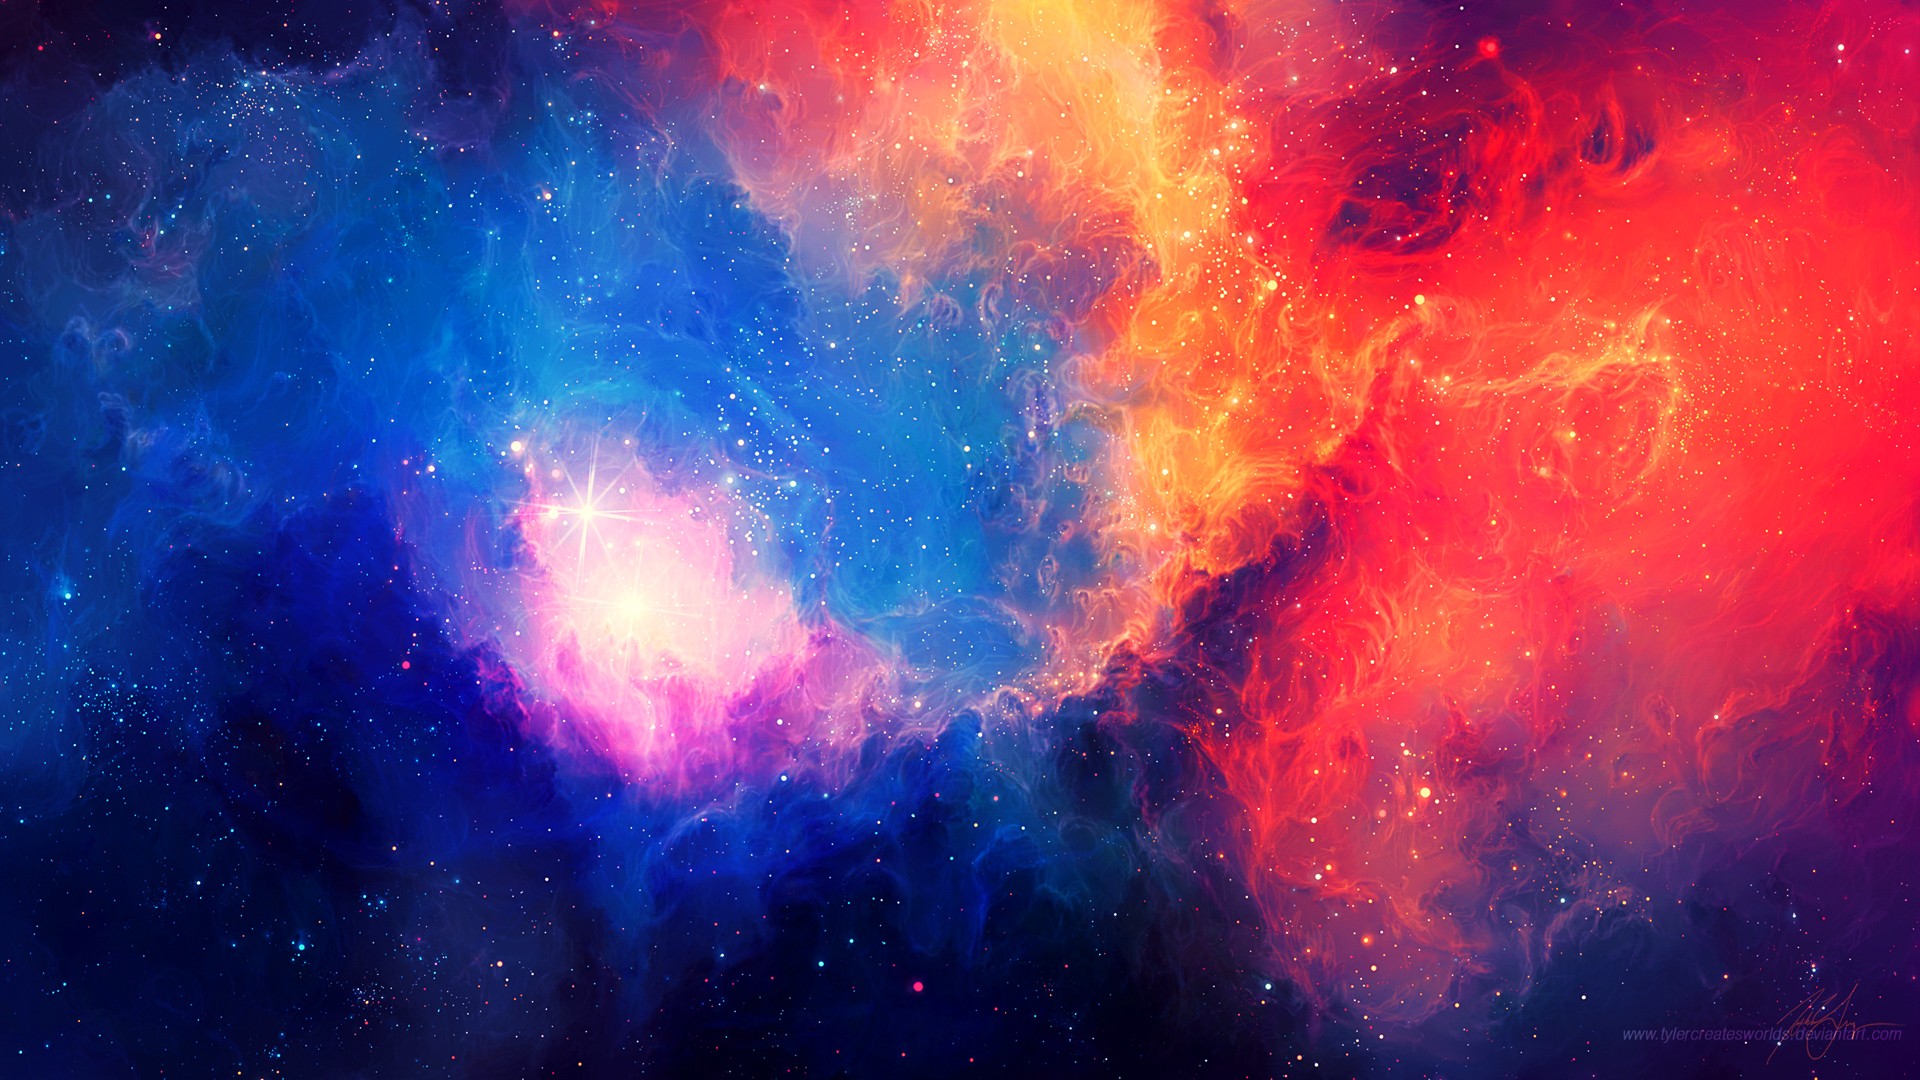 Colorful Galaxy Wallpaper 1920x1080px